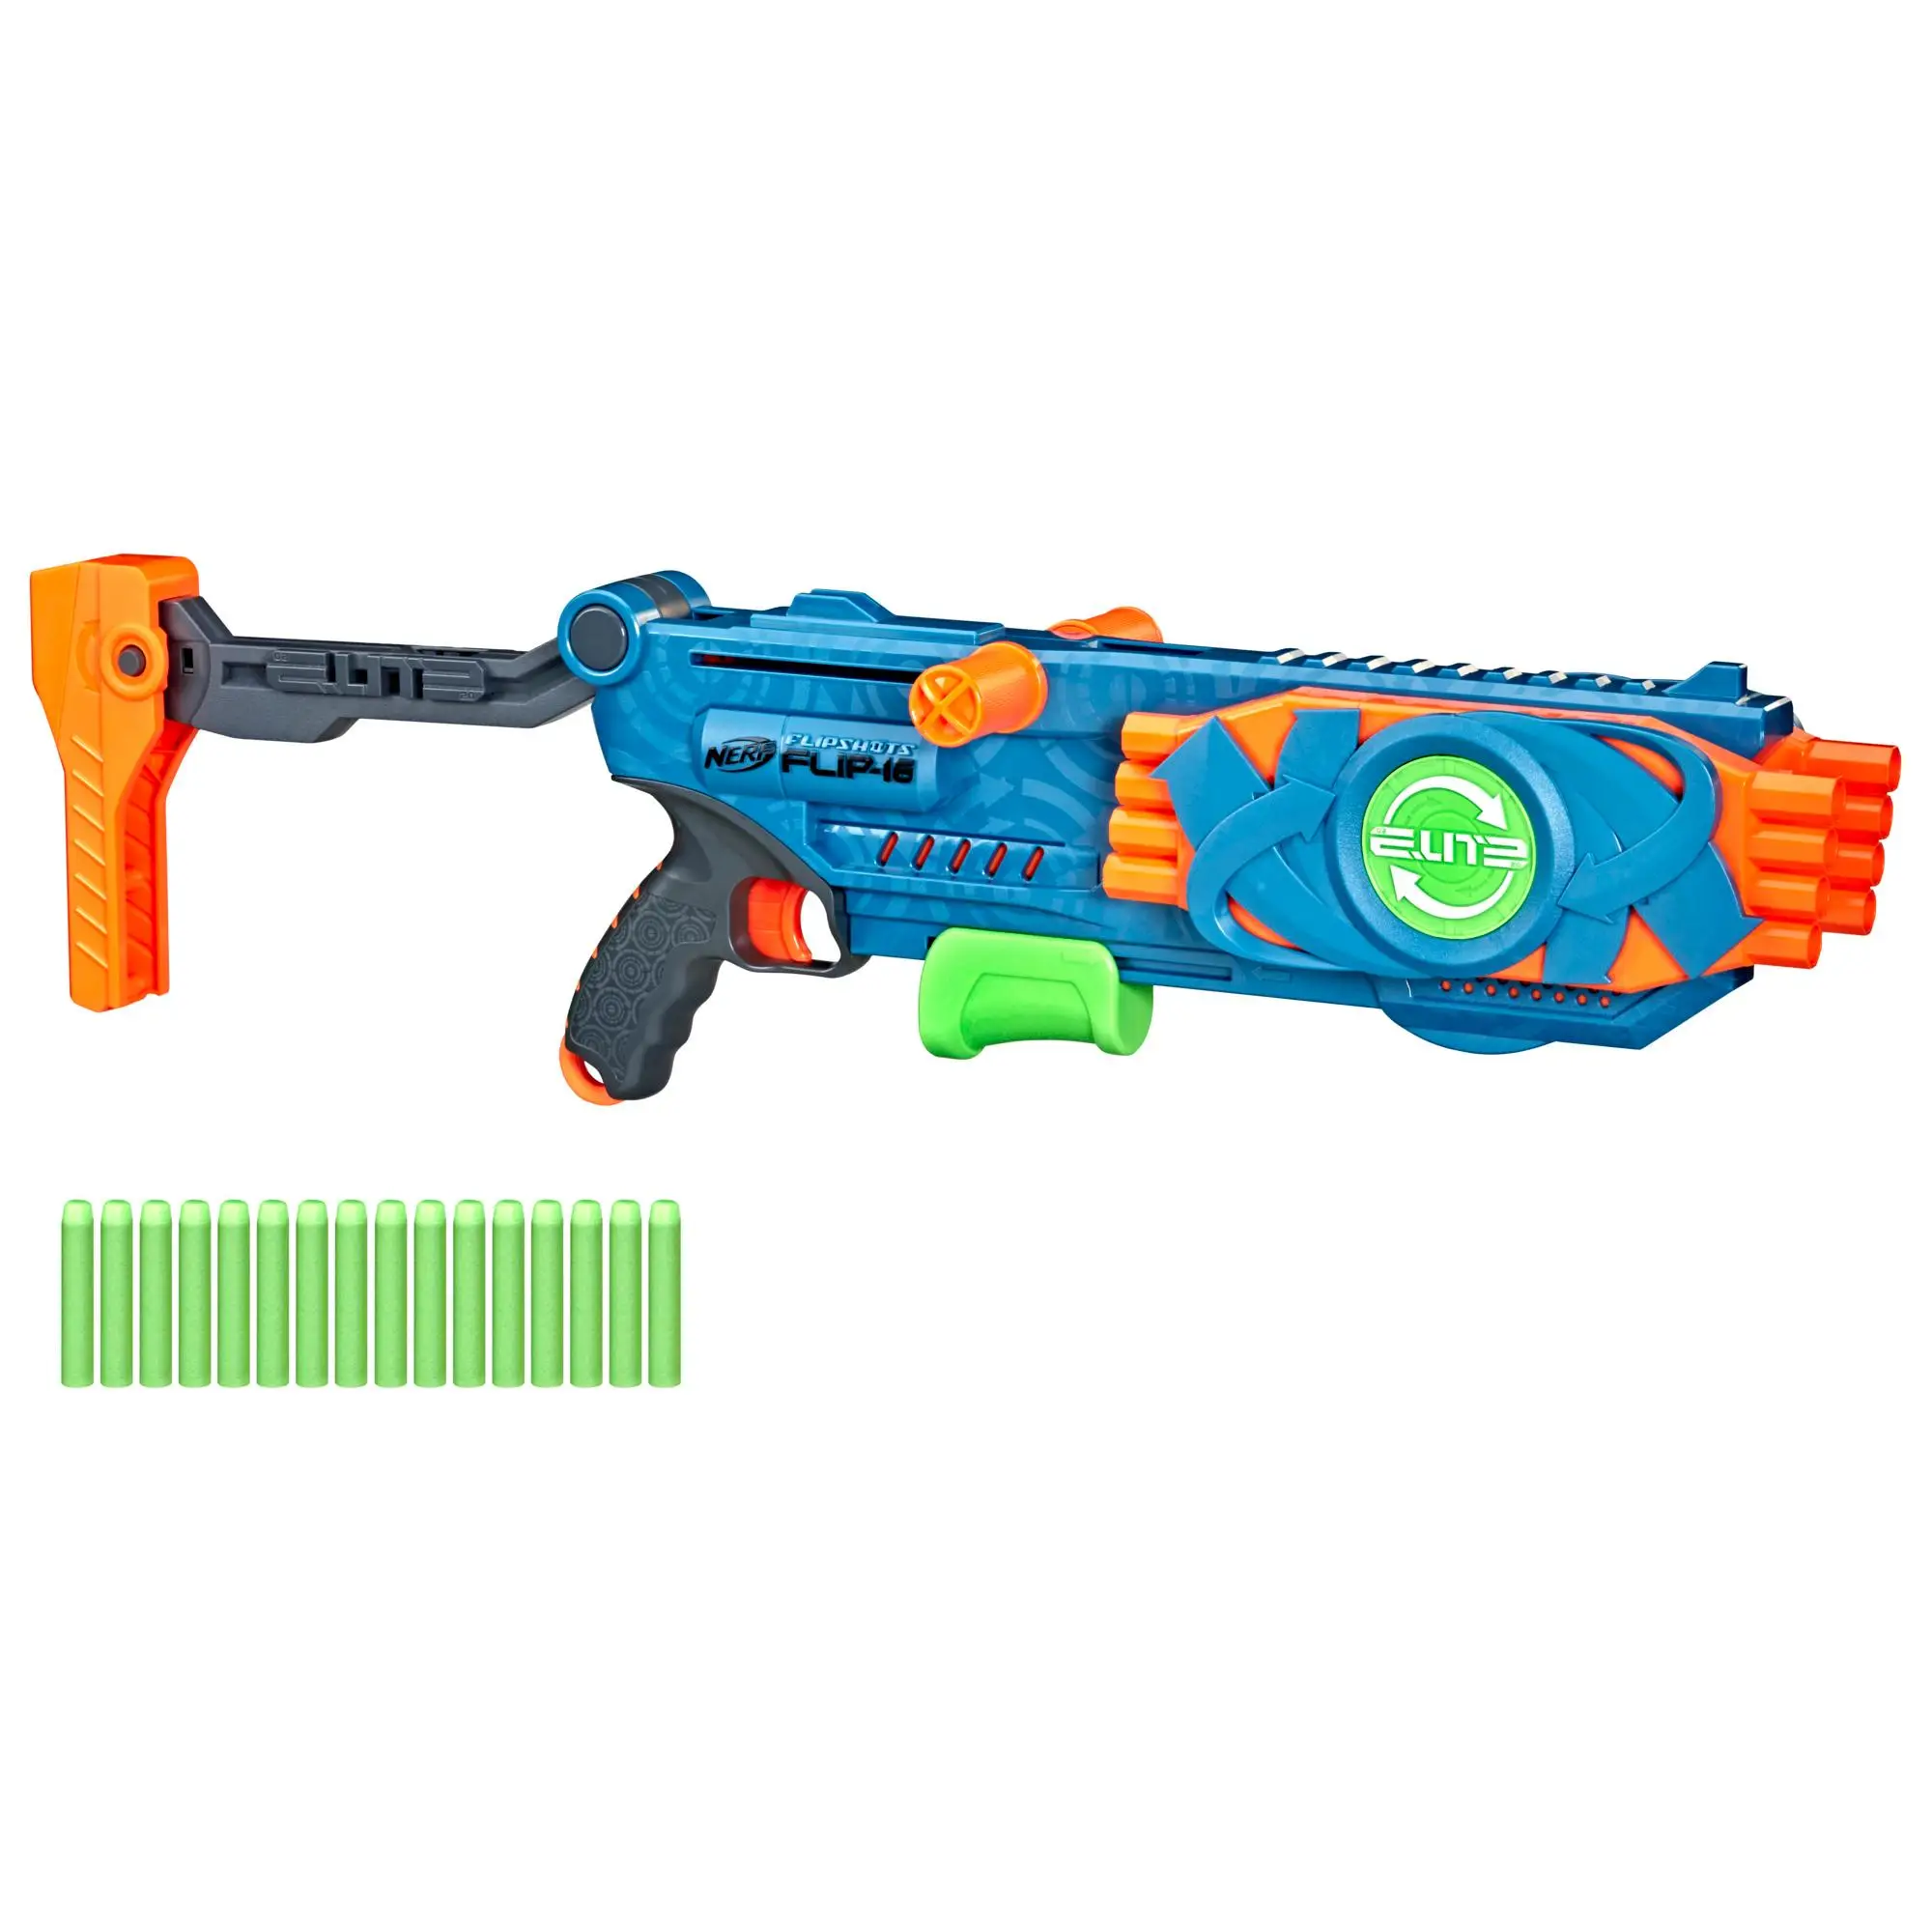 

Nerf Elite 2.0 Flipshots Flip-16 Orjinal Dart Gun, 8 stand out and 8 Facing 16 Rounds Capacity Have